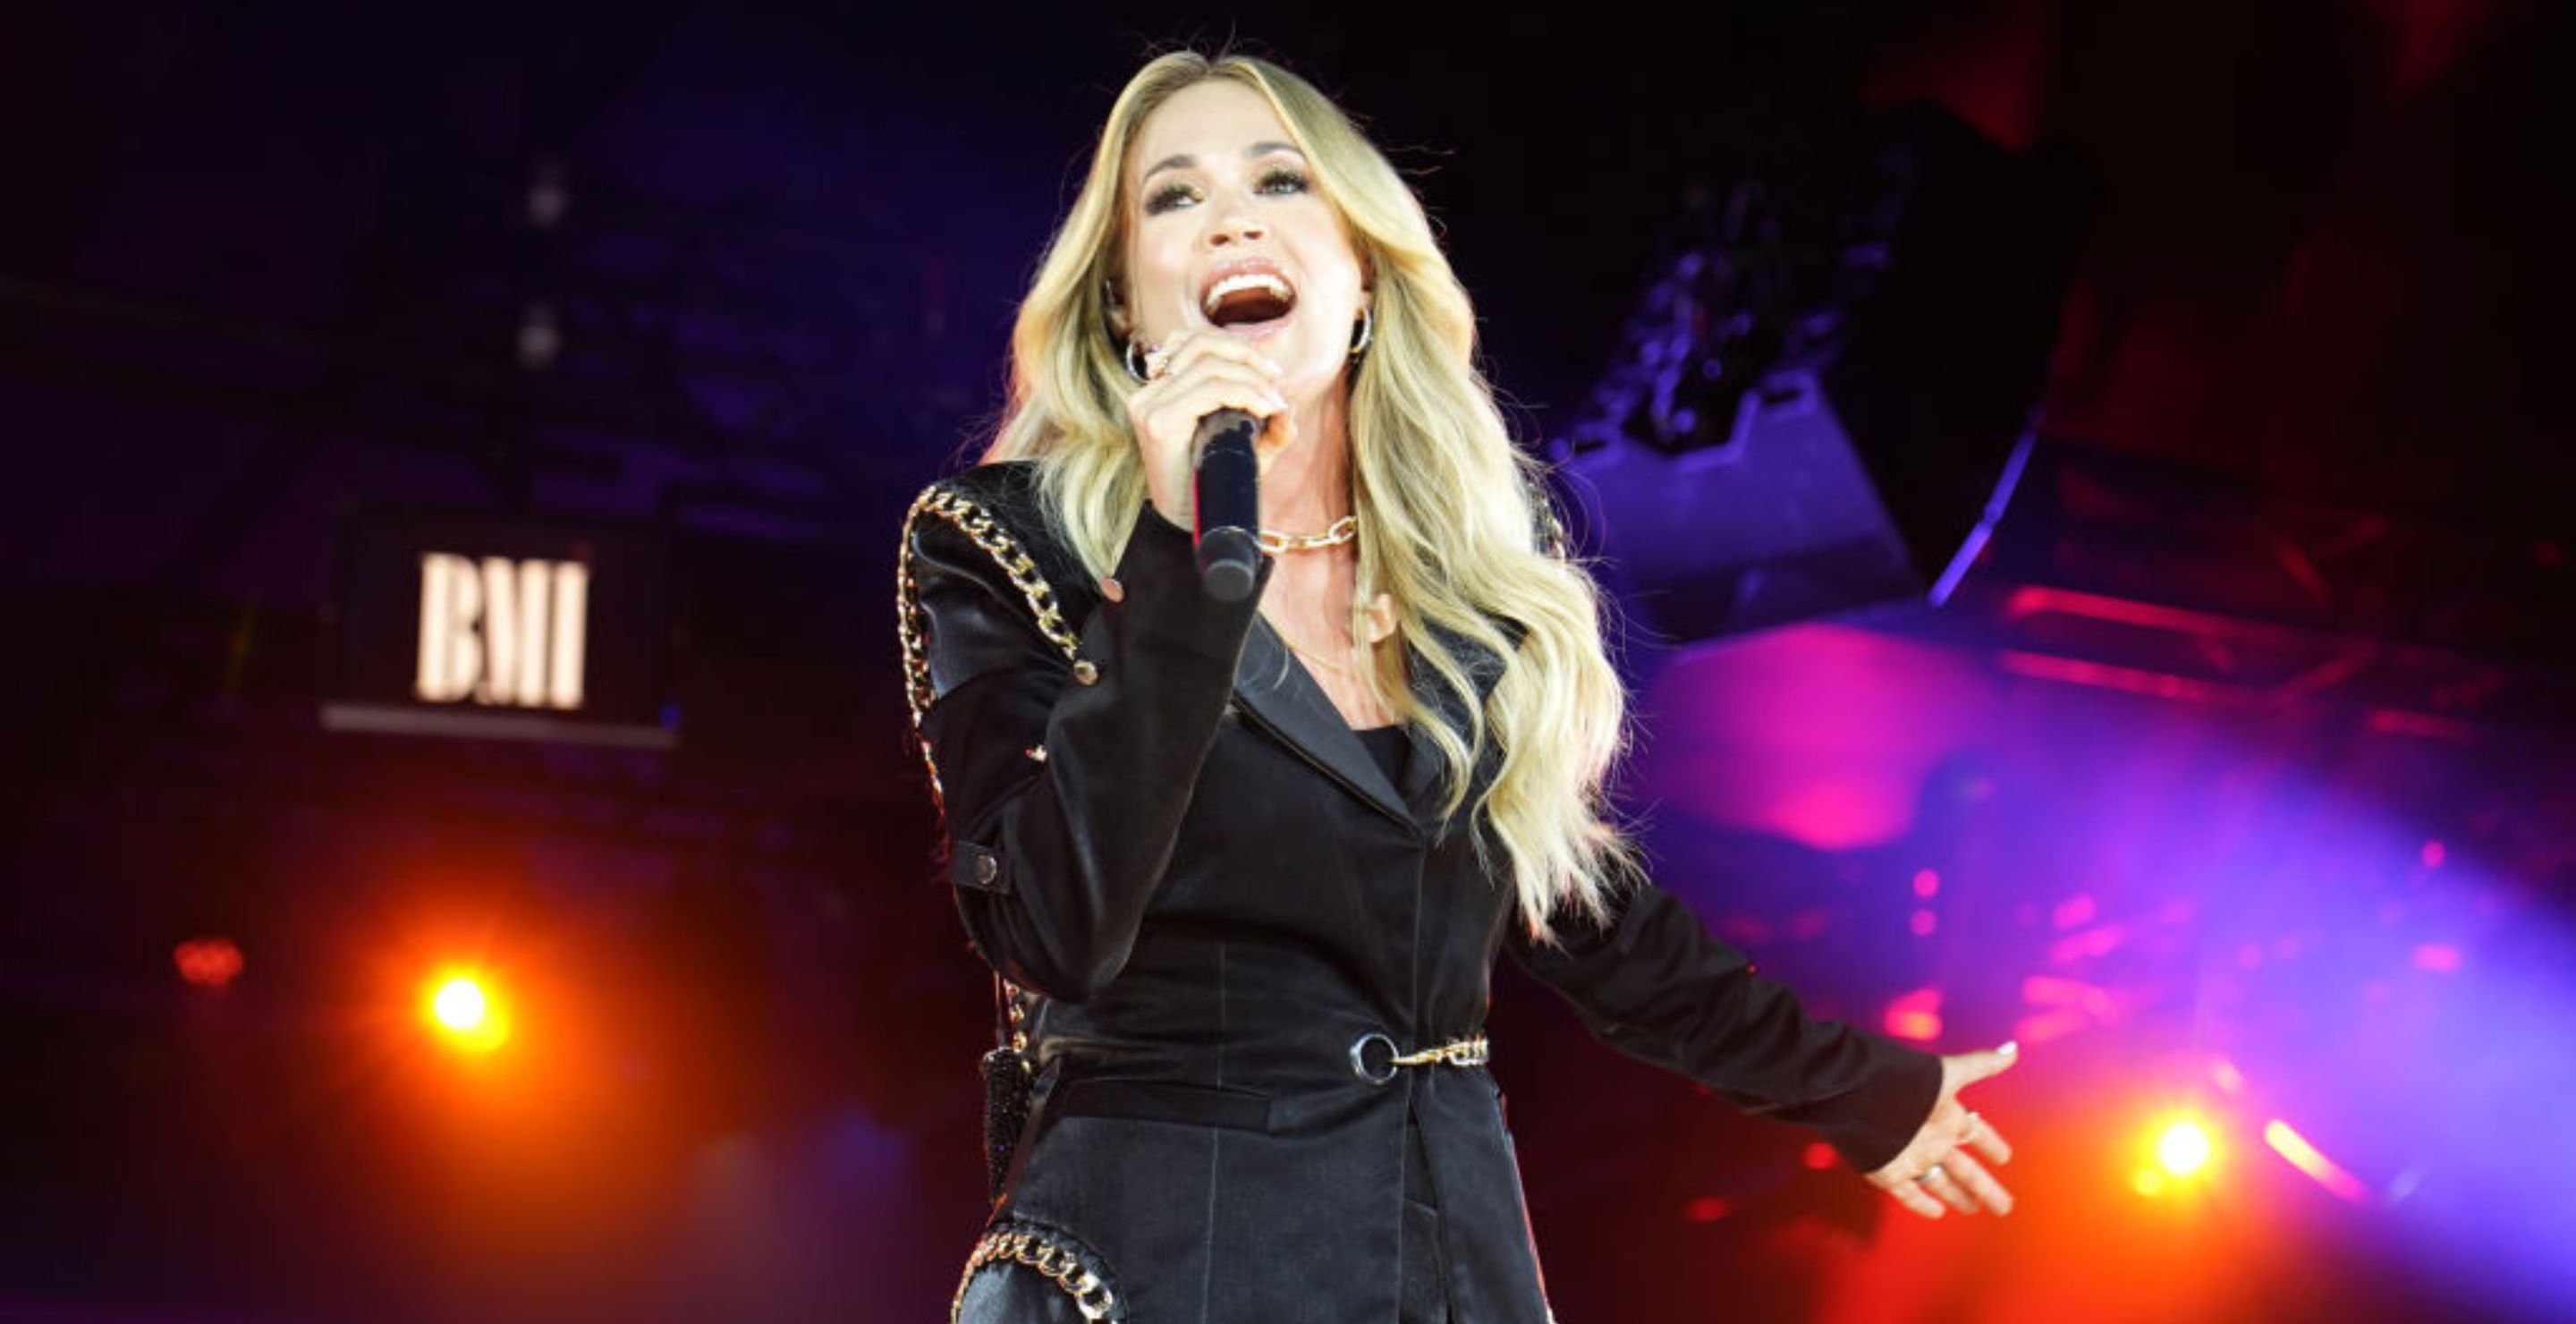 Kickoff Jam Is Canceled Festival Featured All-Star Lineup That Included Carrie Underwood